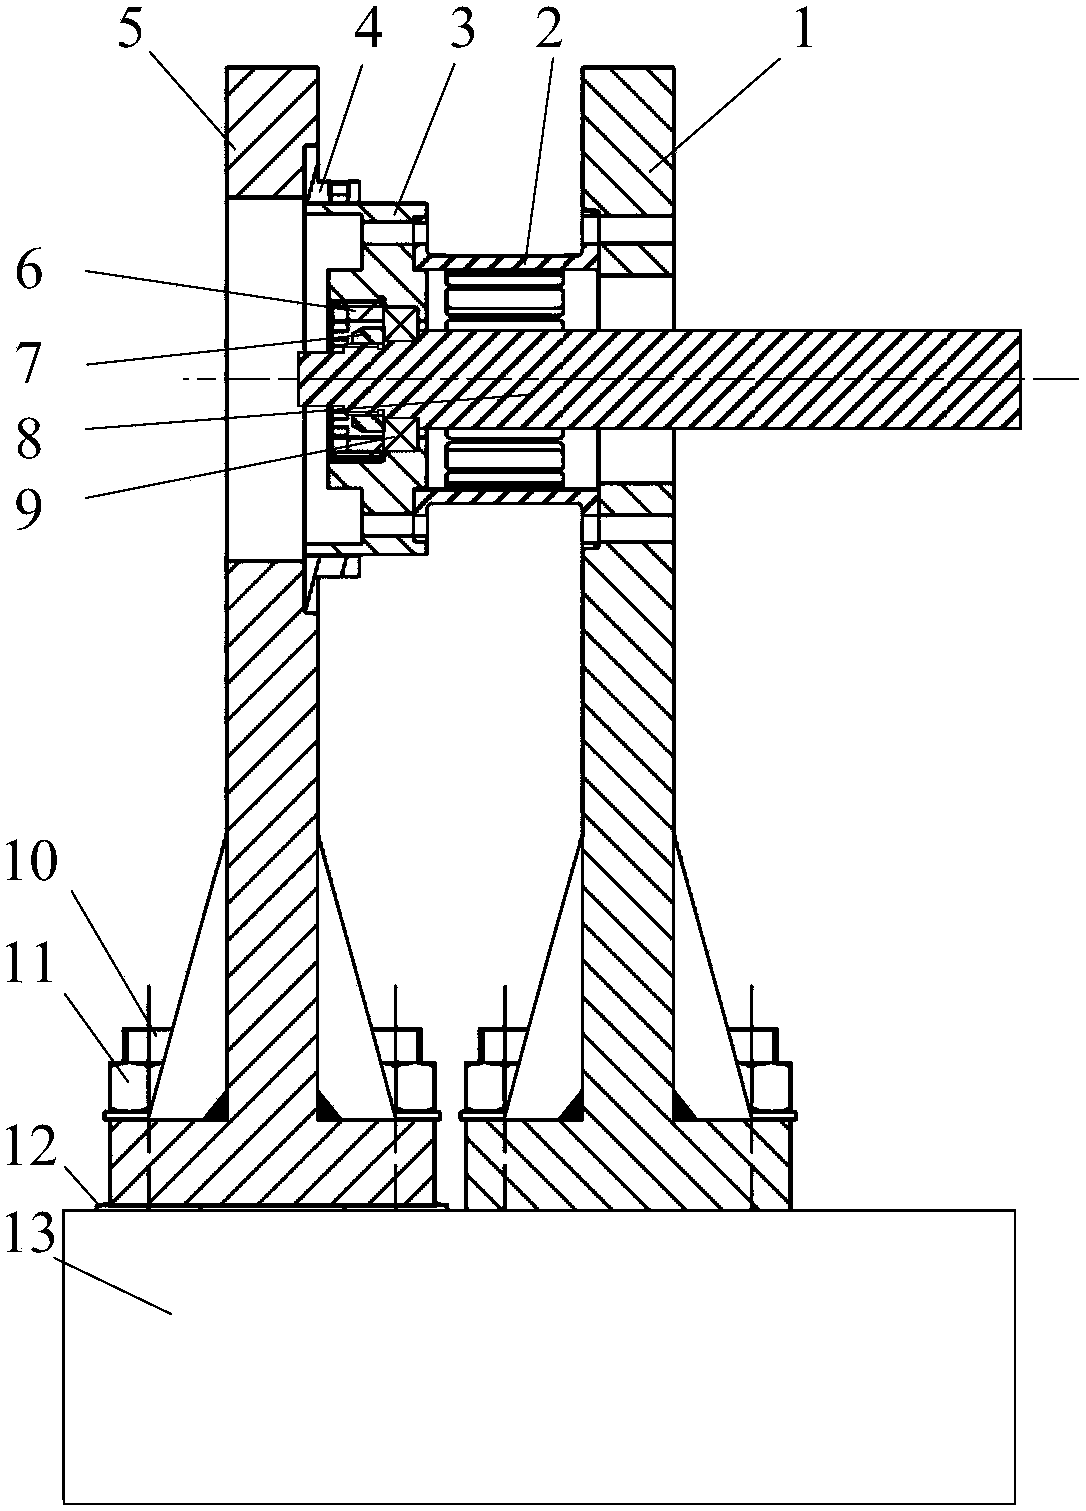 Supporting structure for determining the influence characteristics of squeeze film damper parameters